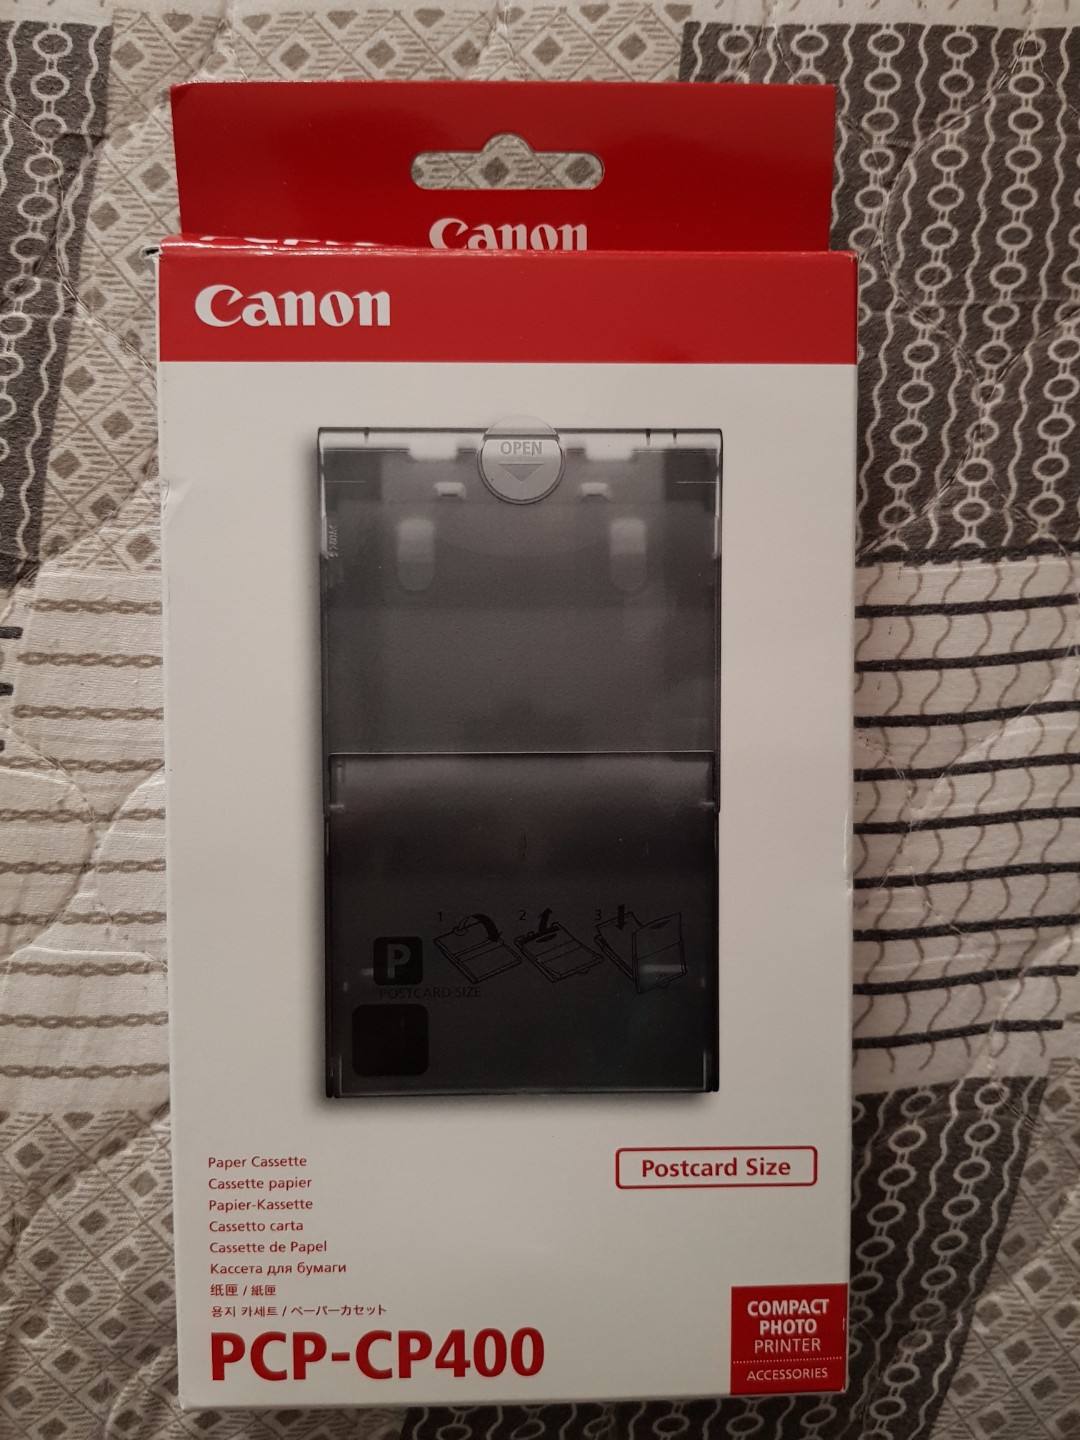 Canon Pcp Cp400 Computers And Tech Printers Scanners And Copiers On Carousell 6361